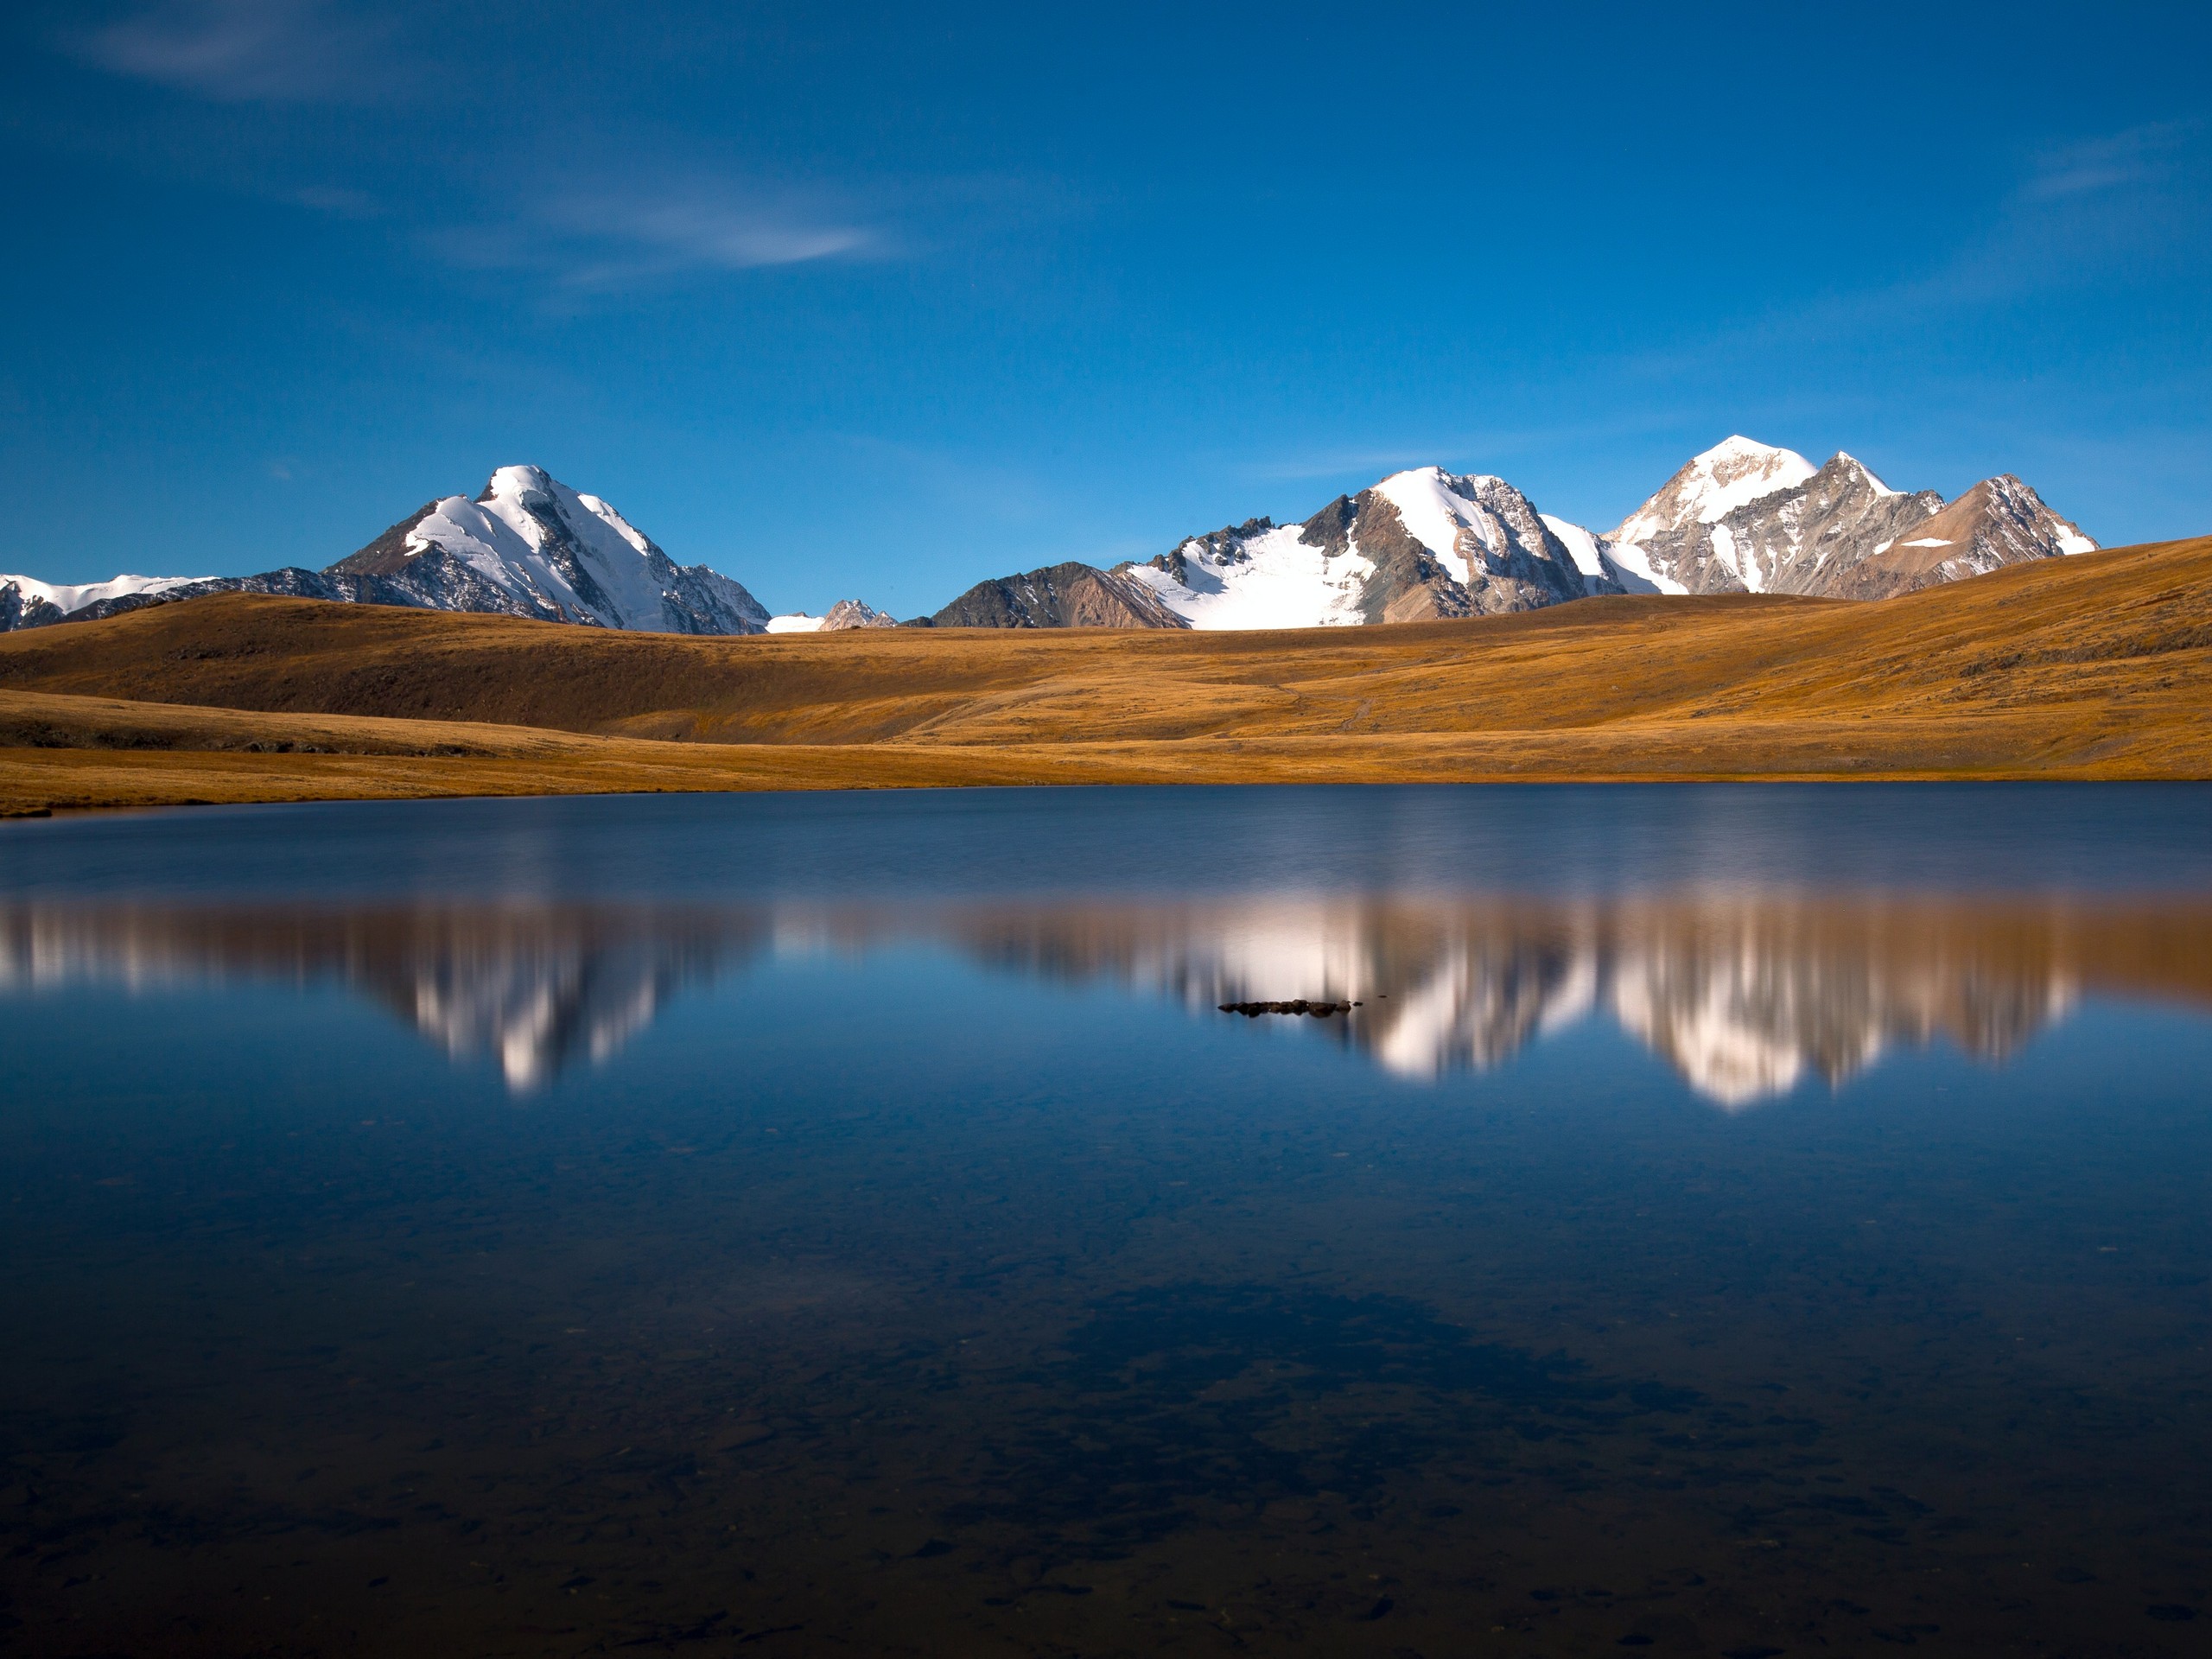 Mountain reflections in the vast Mongolian wilderness